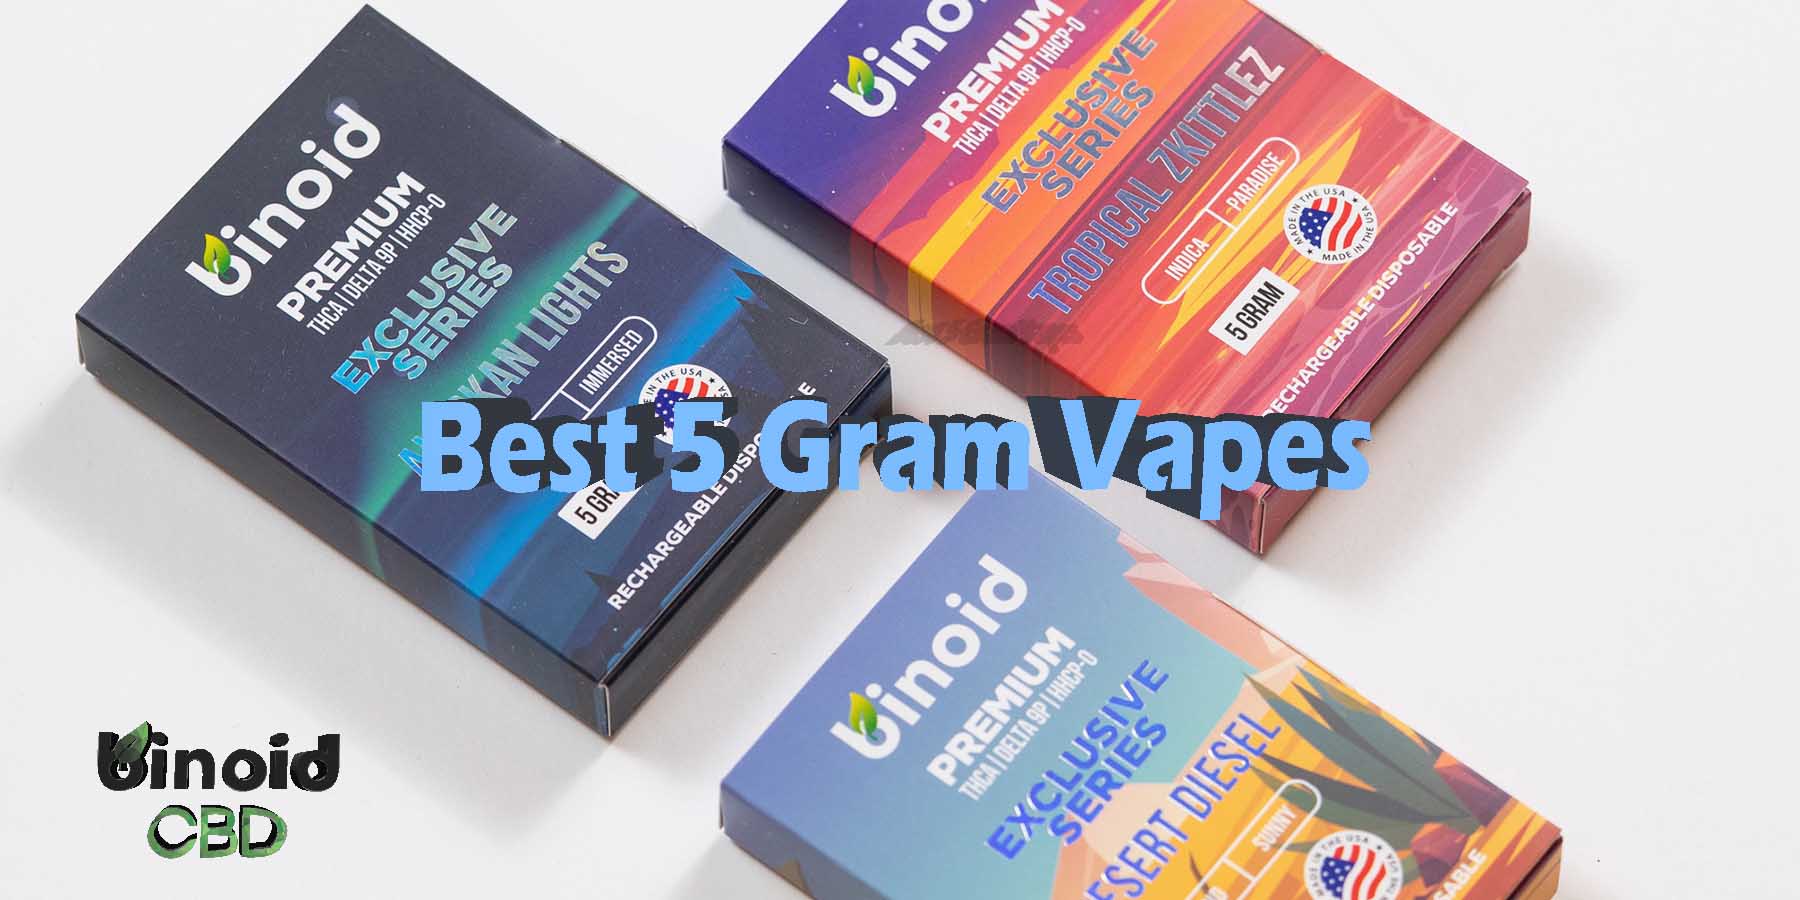 Best 5 Gram Vapes Review Take Work Online Best Brand Price Get Near Me Lowest Coupon Discount Store Shop Vapes Carts Online Binoid